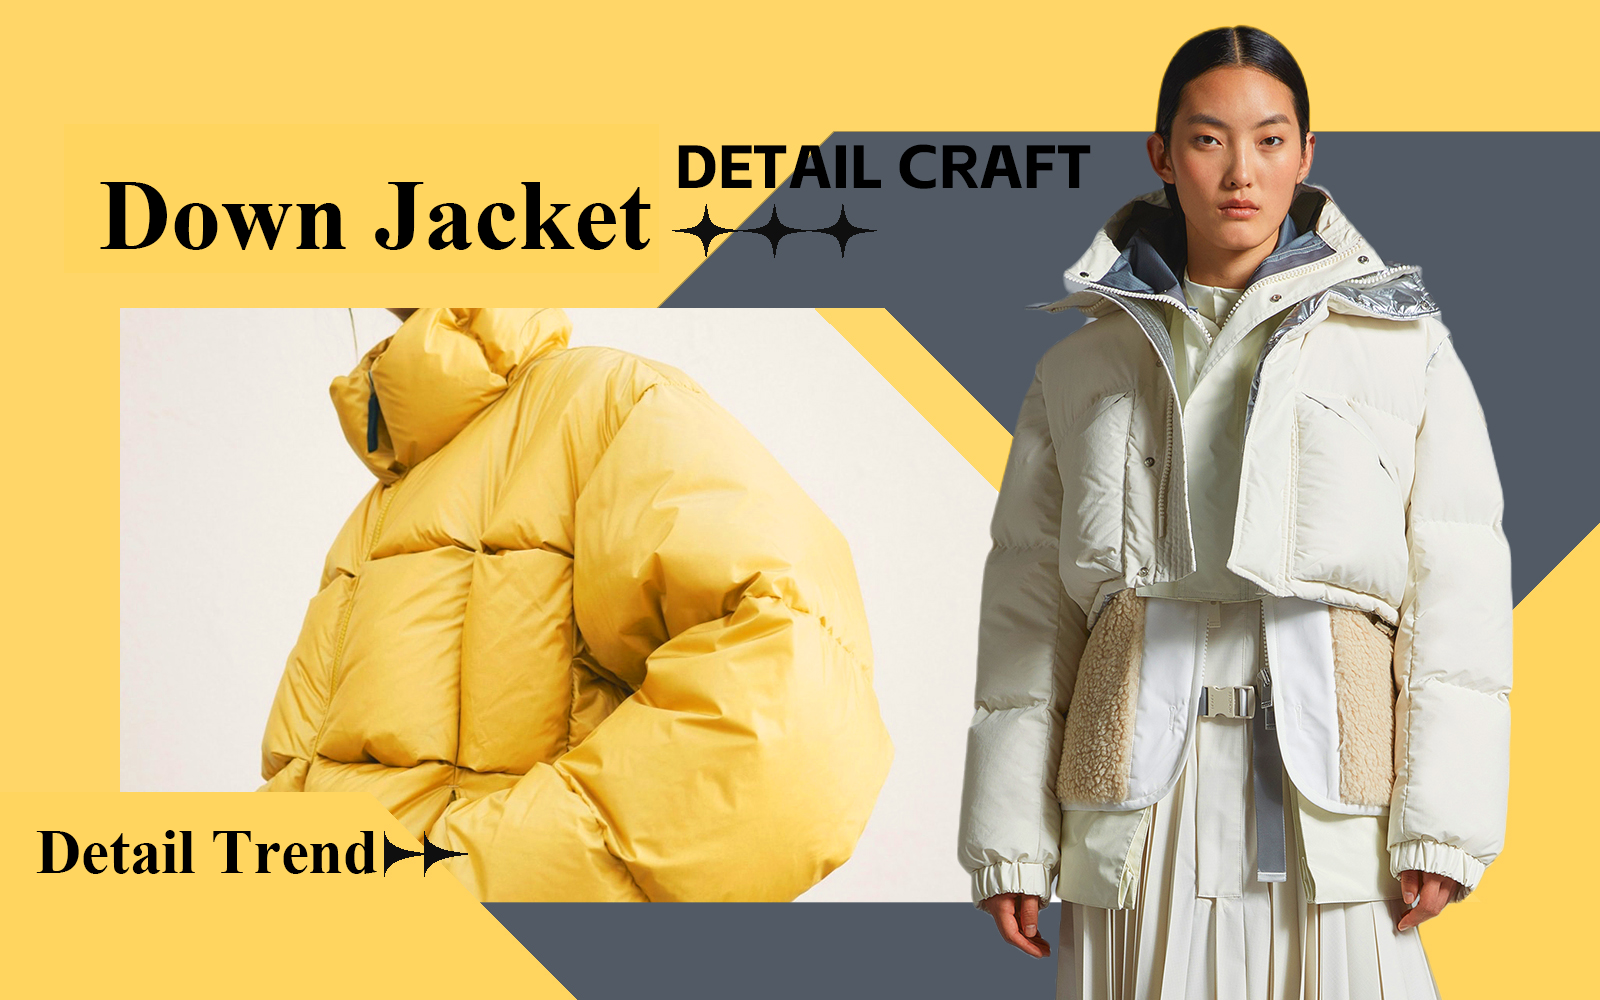 Upgraded Deconstruction -- The Detail & Craft Trend for Women's Down Jacket